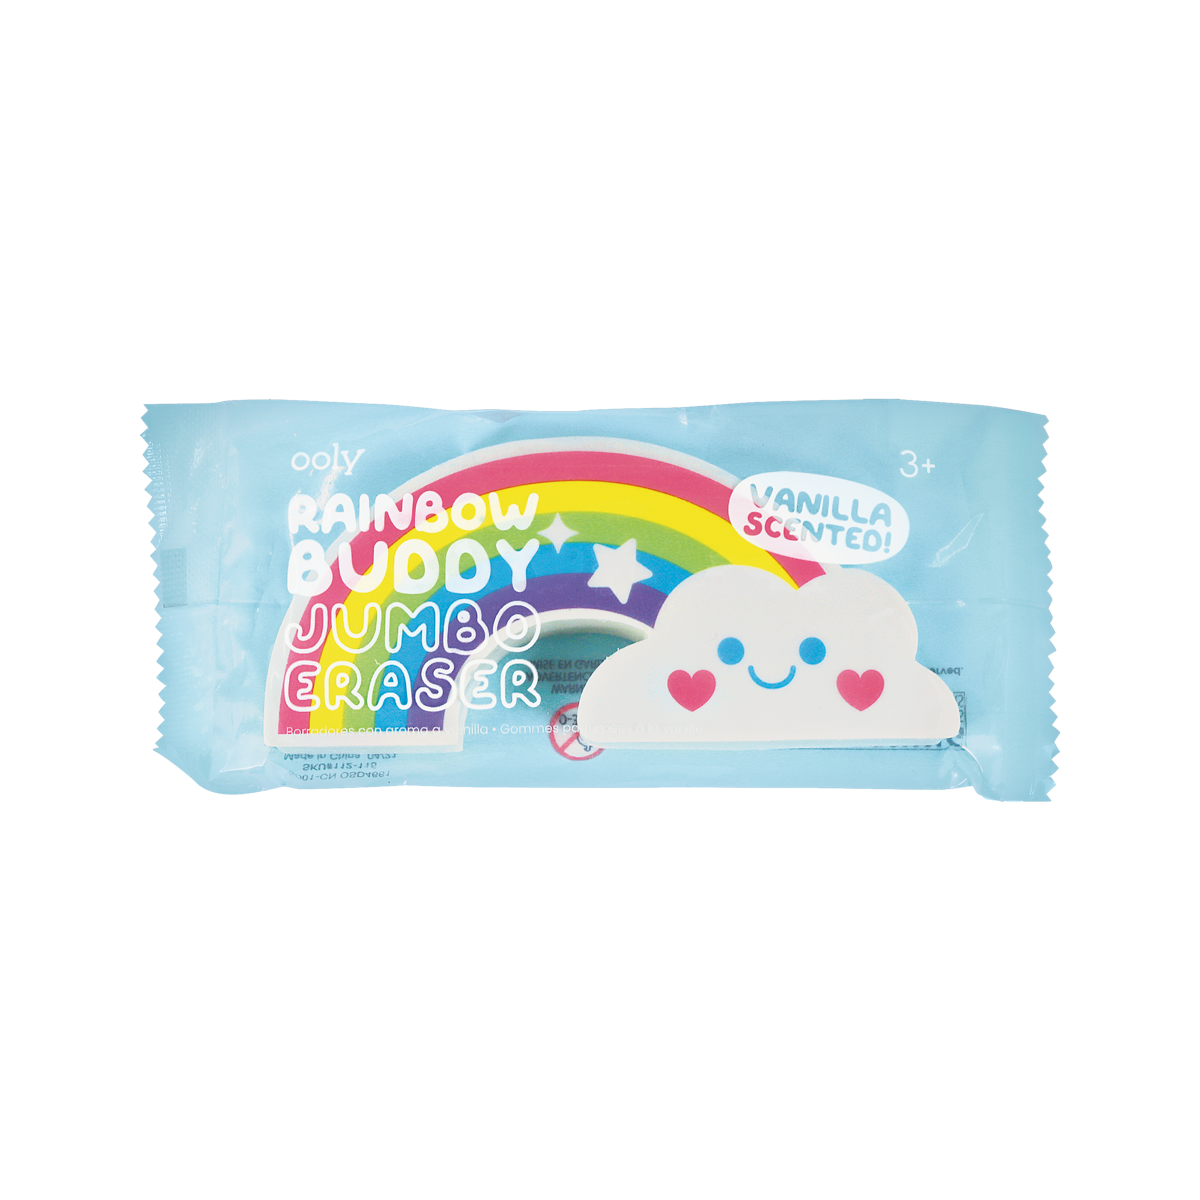 OOLY Rainbow Buddy Scented Jumbo Eraser individually packaged